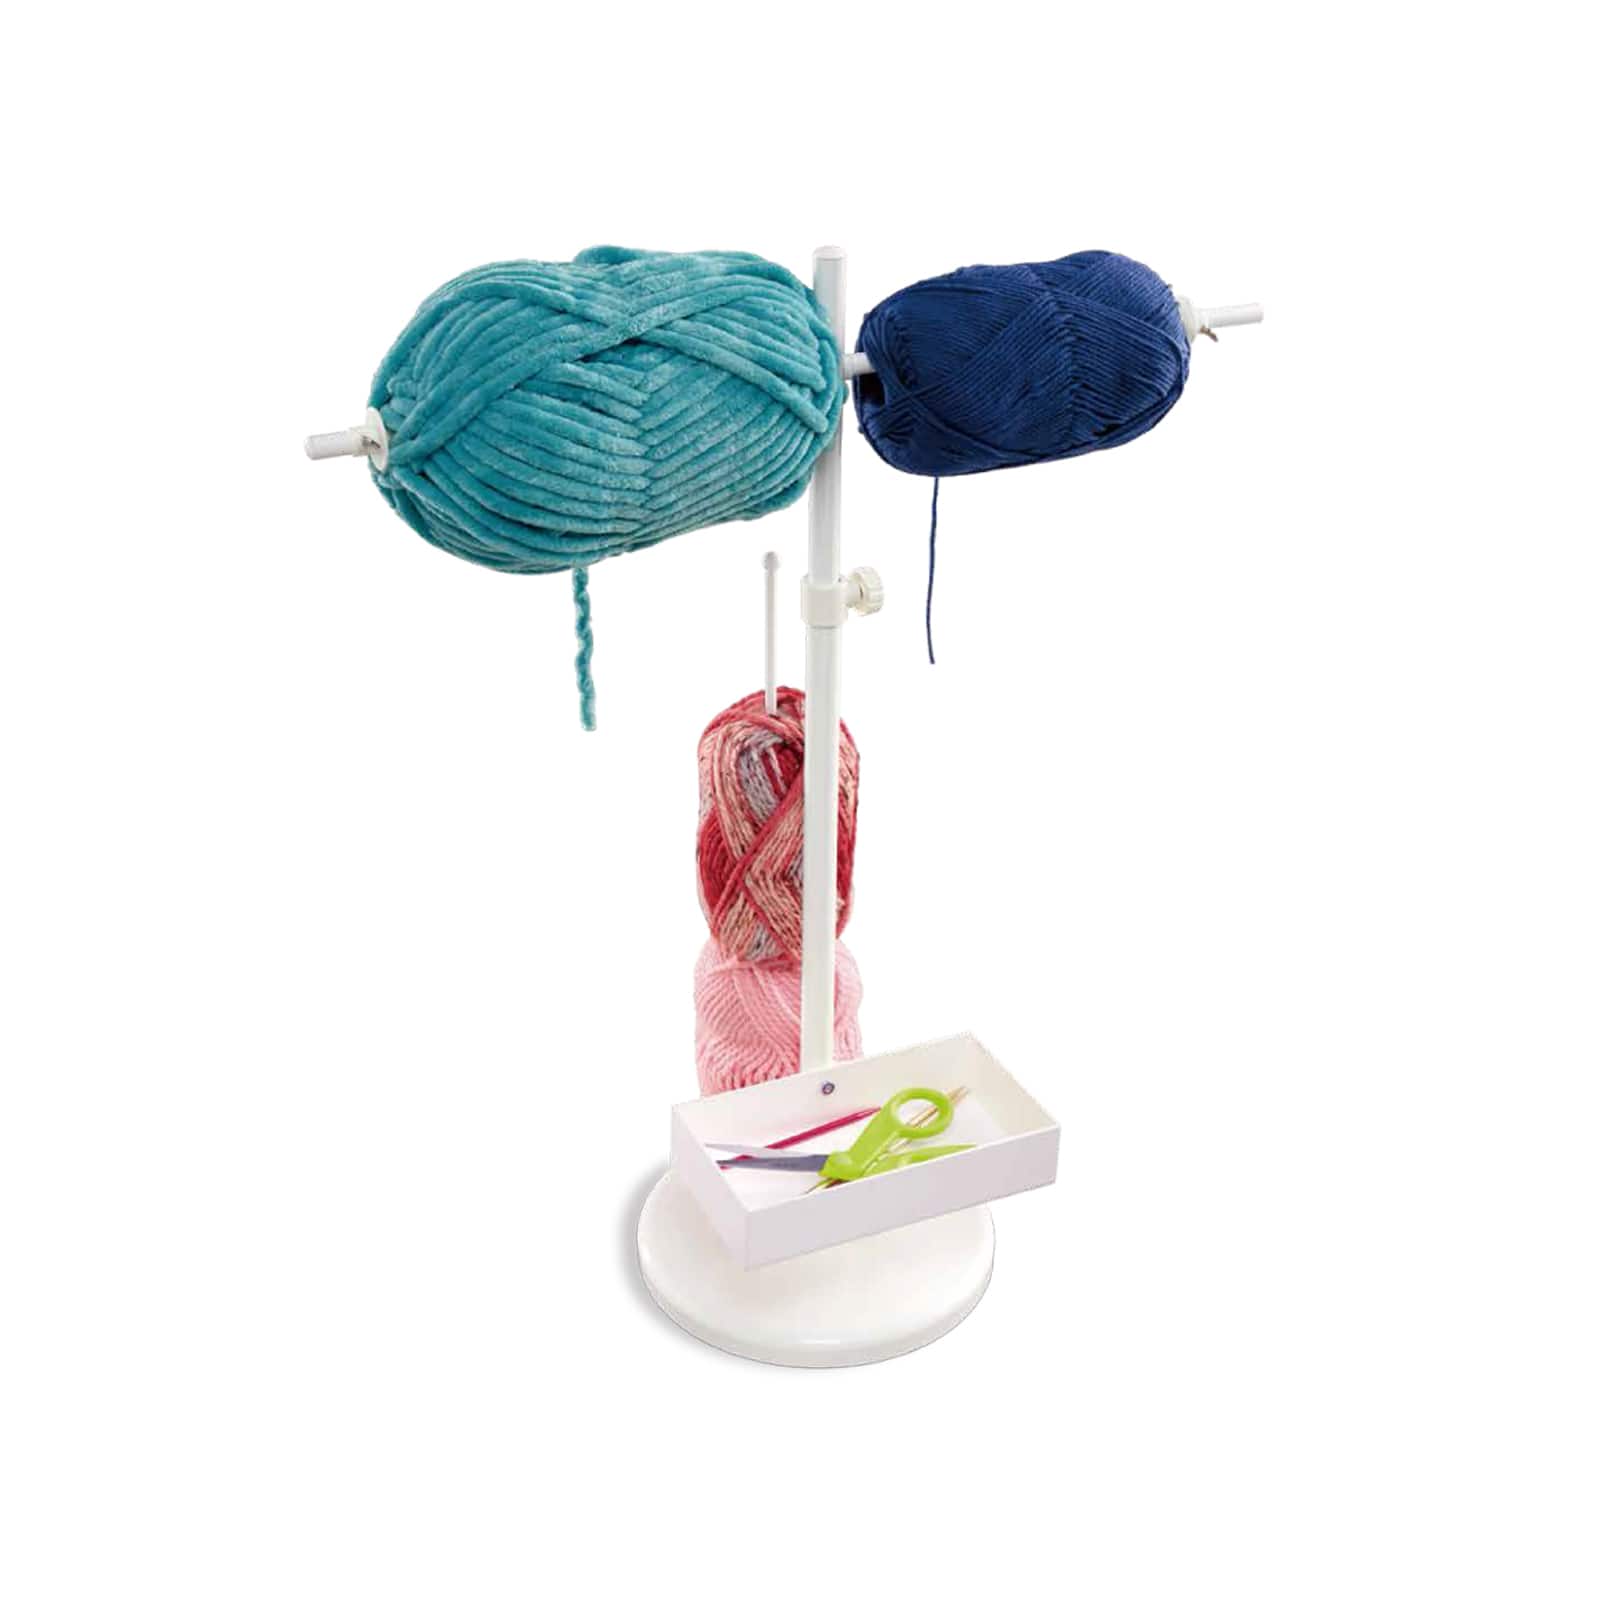 Standing Yarn Roller by Loops & Threads